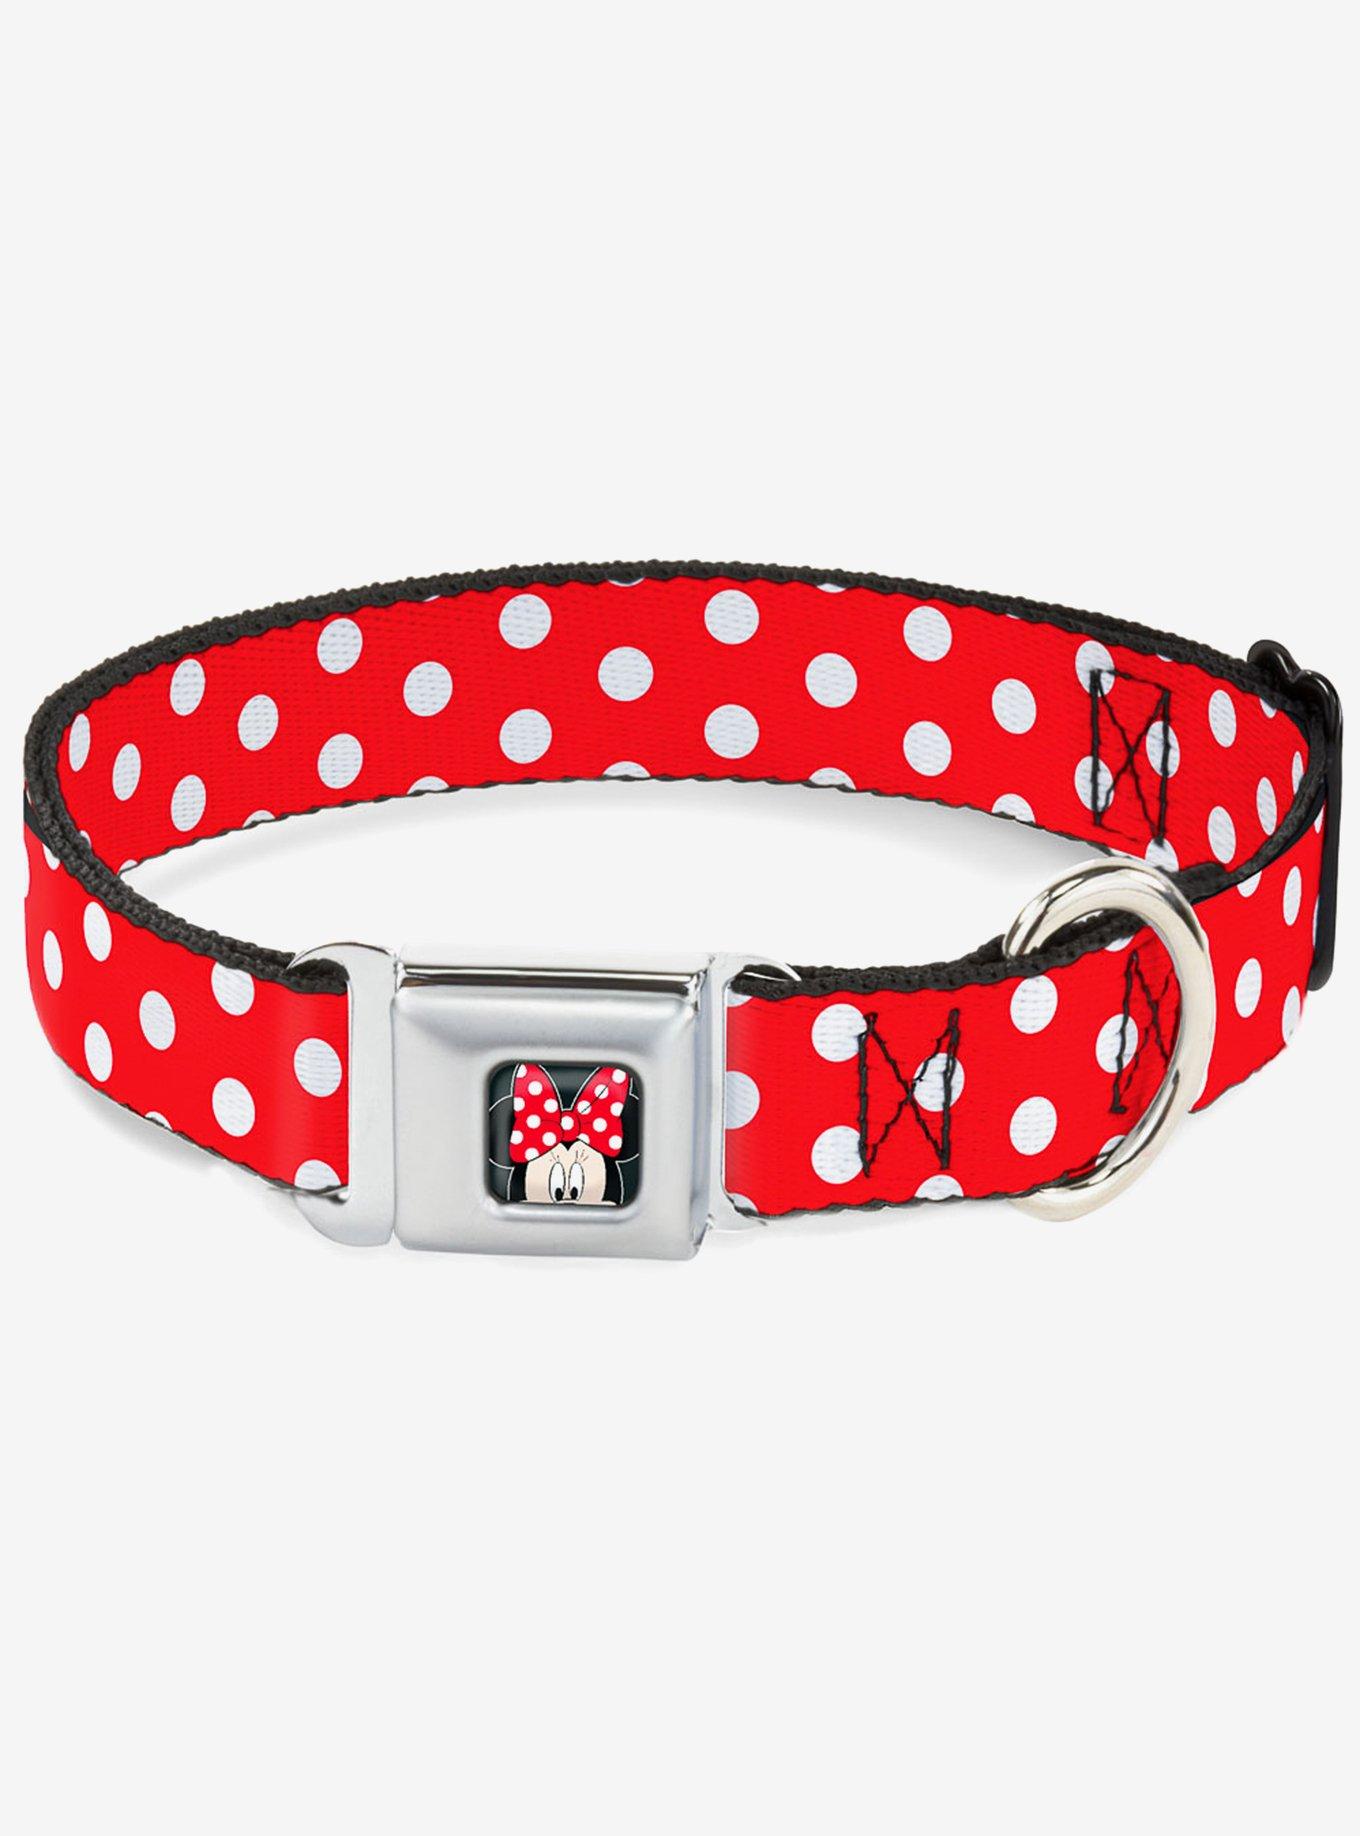 Disney Minnie Mouse Polka Dots Dog Collar Seatbelt Buckle Red White, RED, hi-res